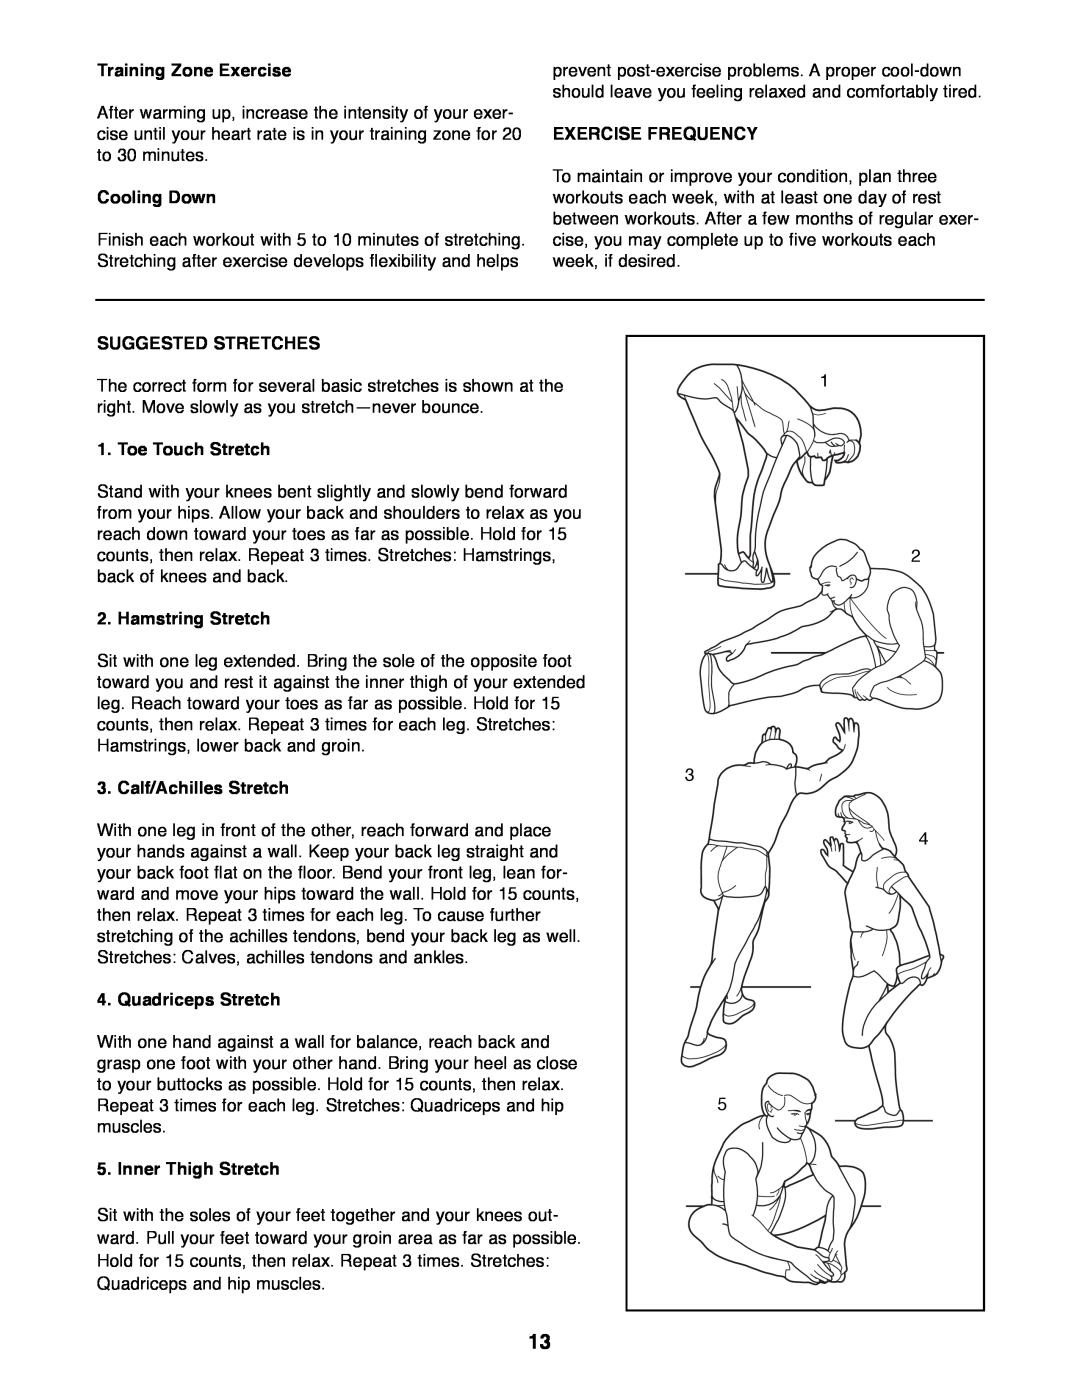 Healthrider HREL89070 Training Zone Exercise, Cooling Down, Exercise Frequency, Suggested Stretches, Toe Touch Stretch 